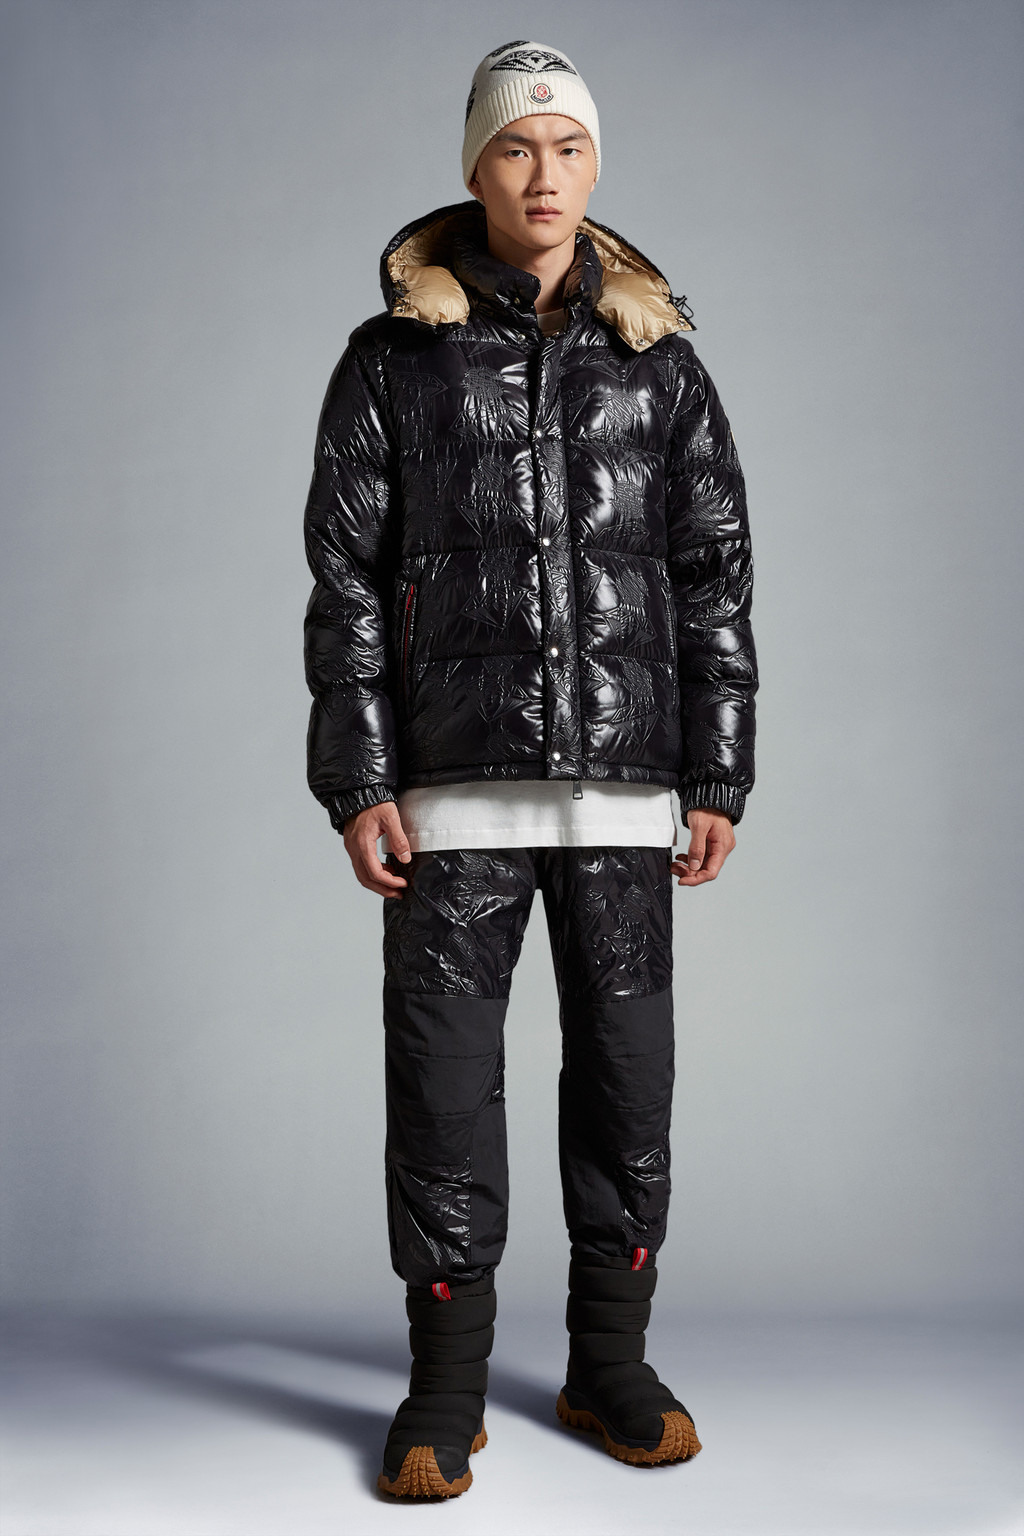 For Special Projects - Moncler x BBC | Moncler SG